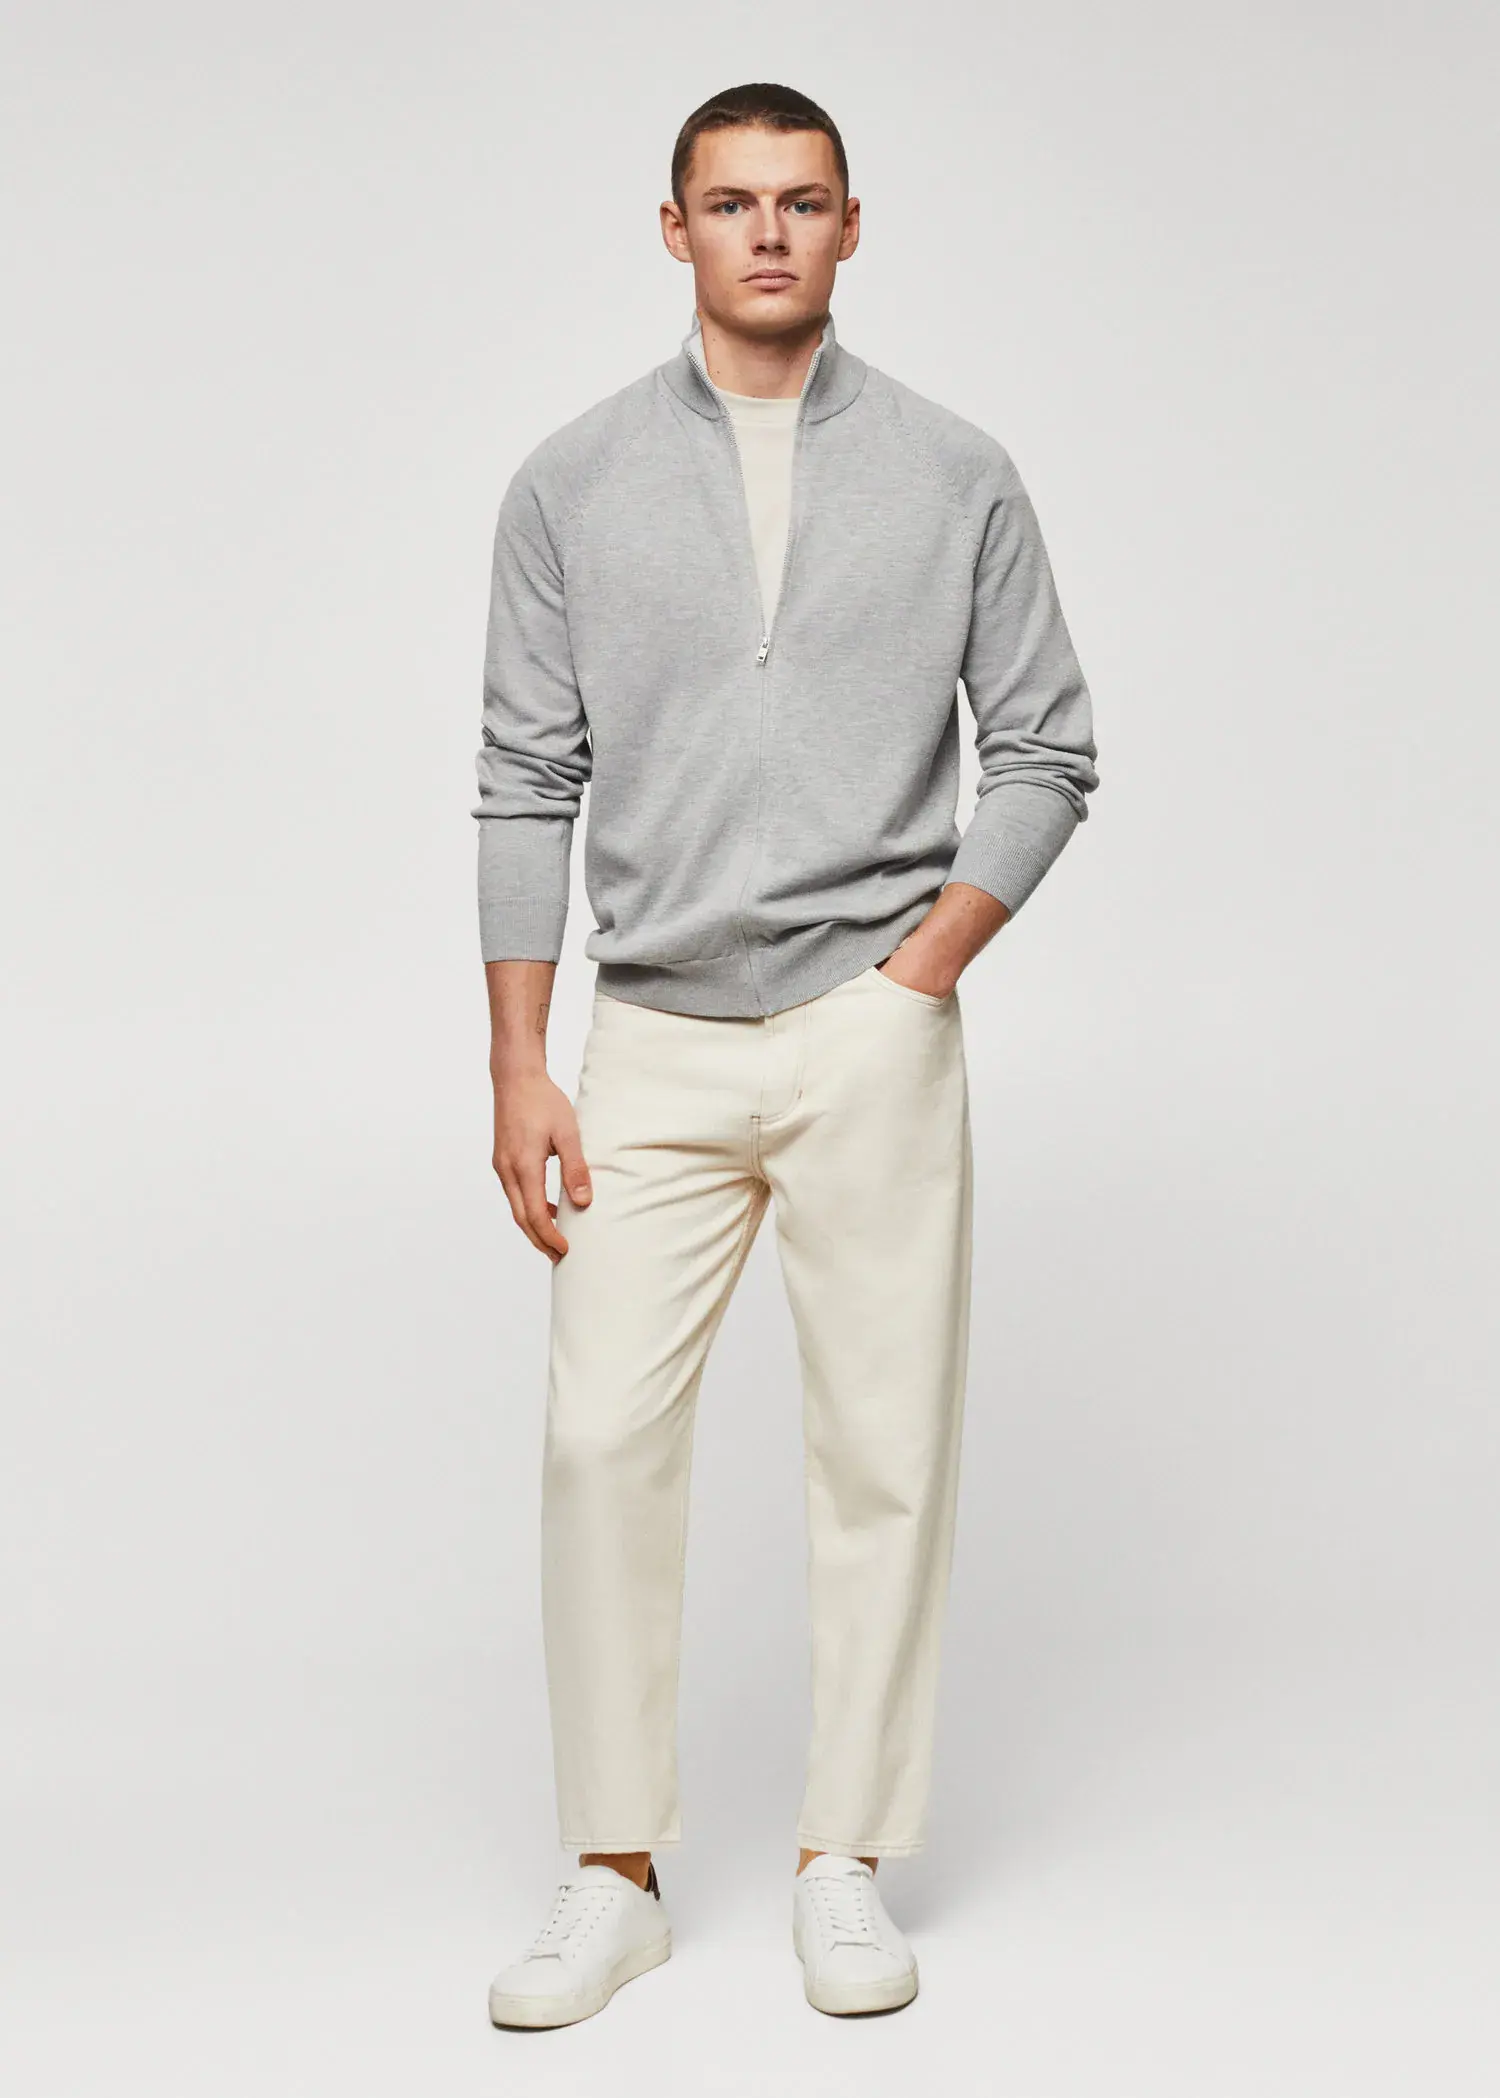 Mango Zipped cotton cardigan. a man in a gray sweater and white pants. 